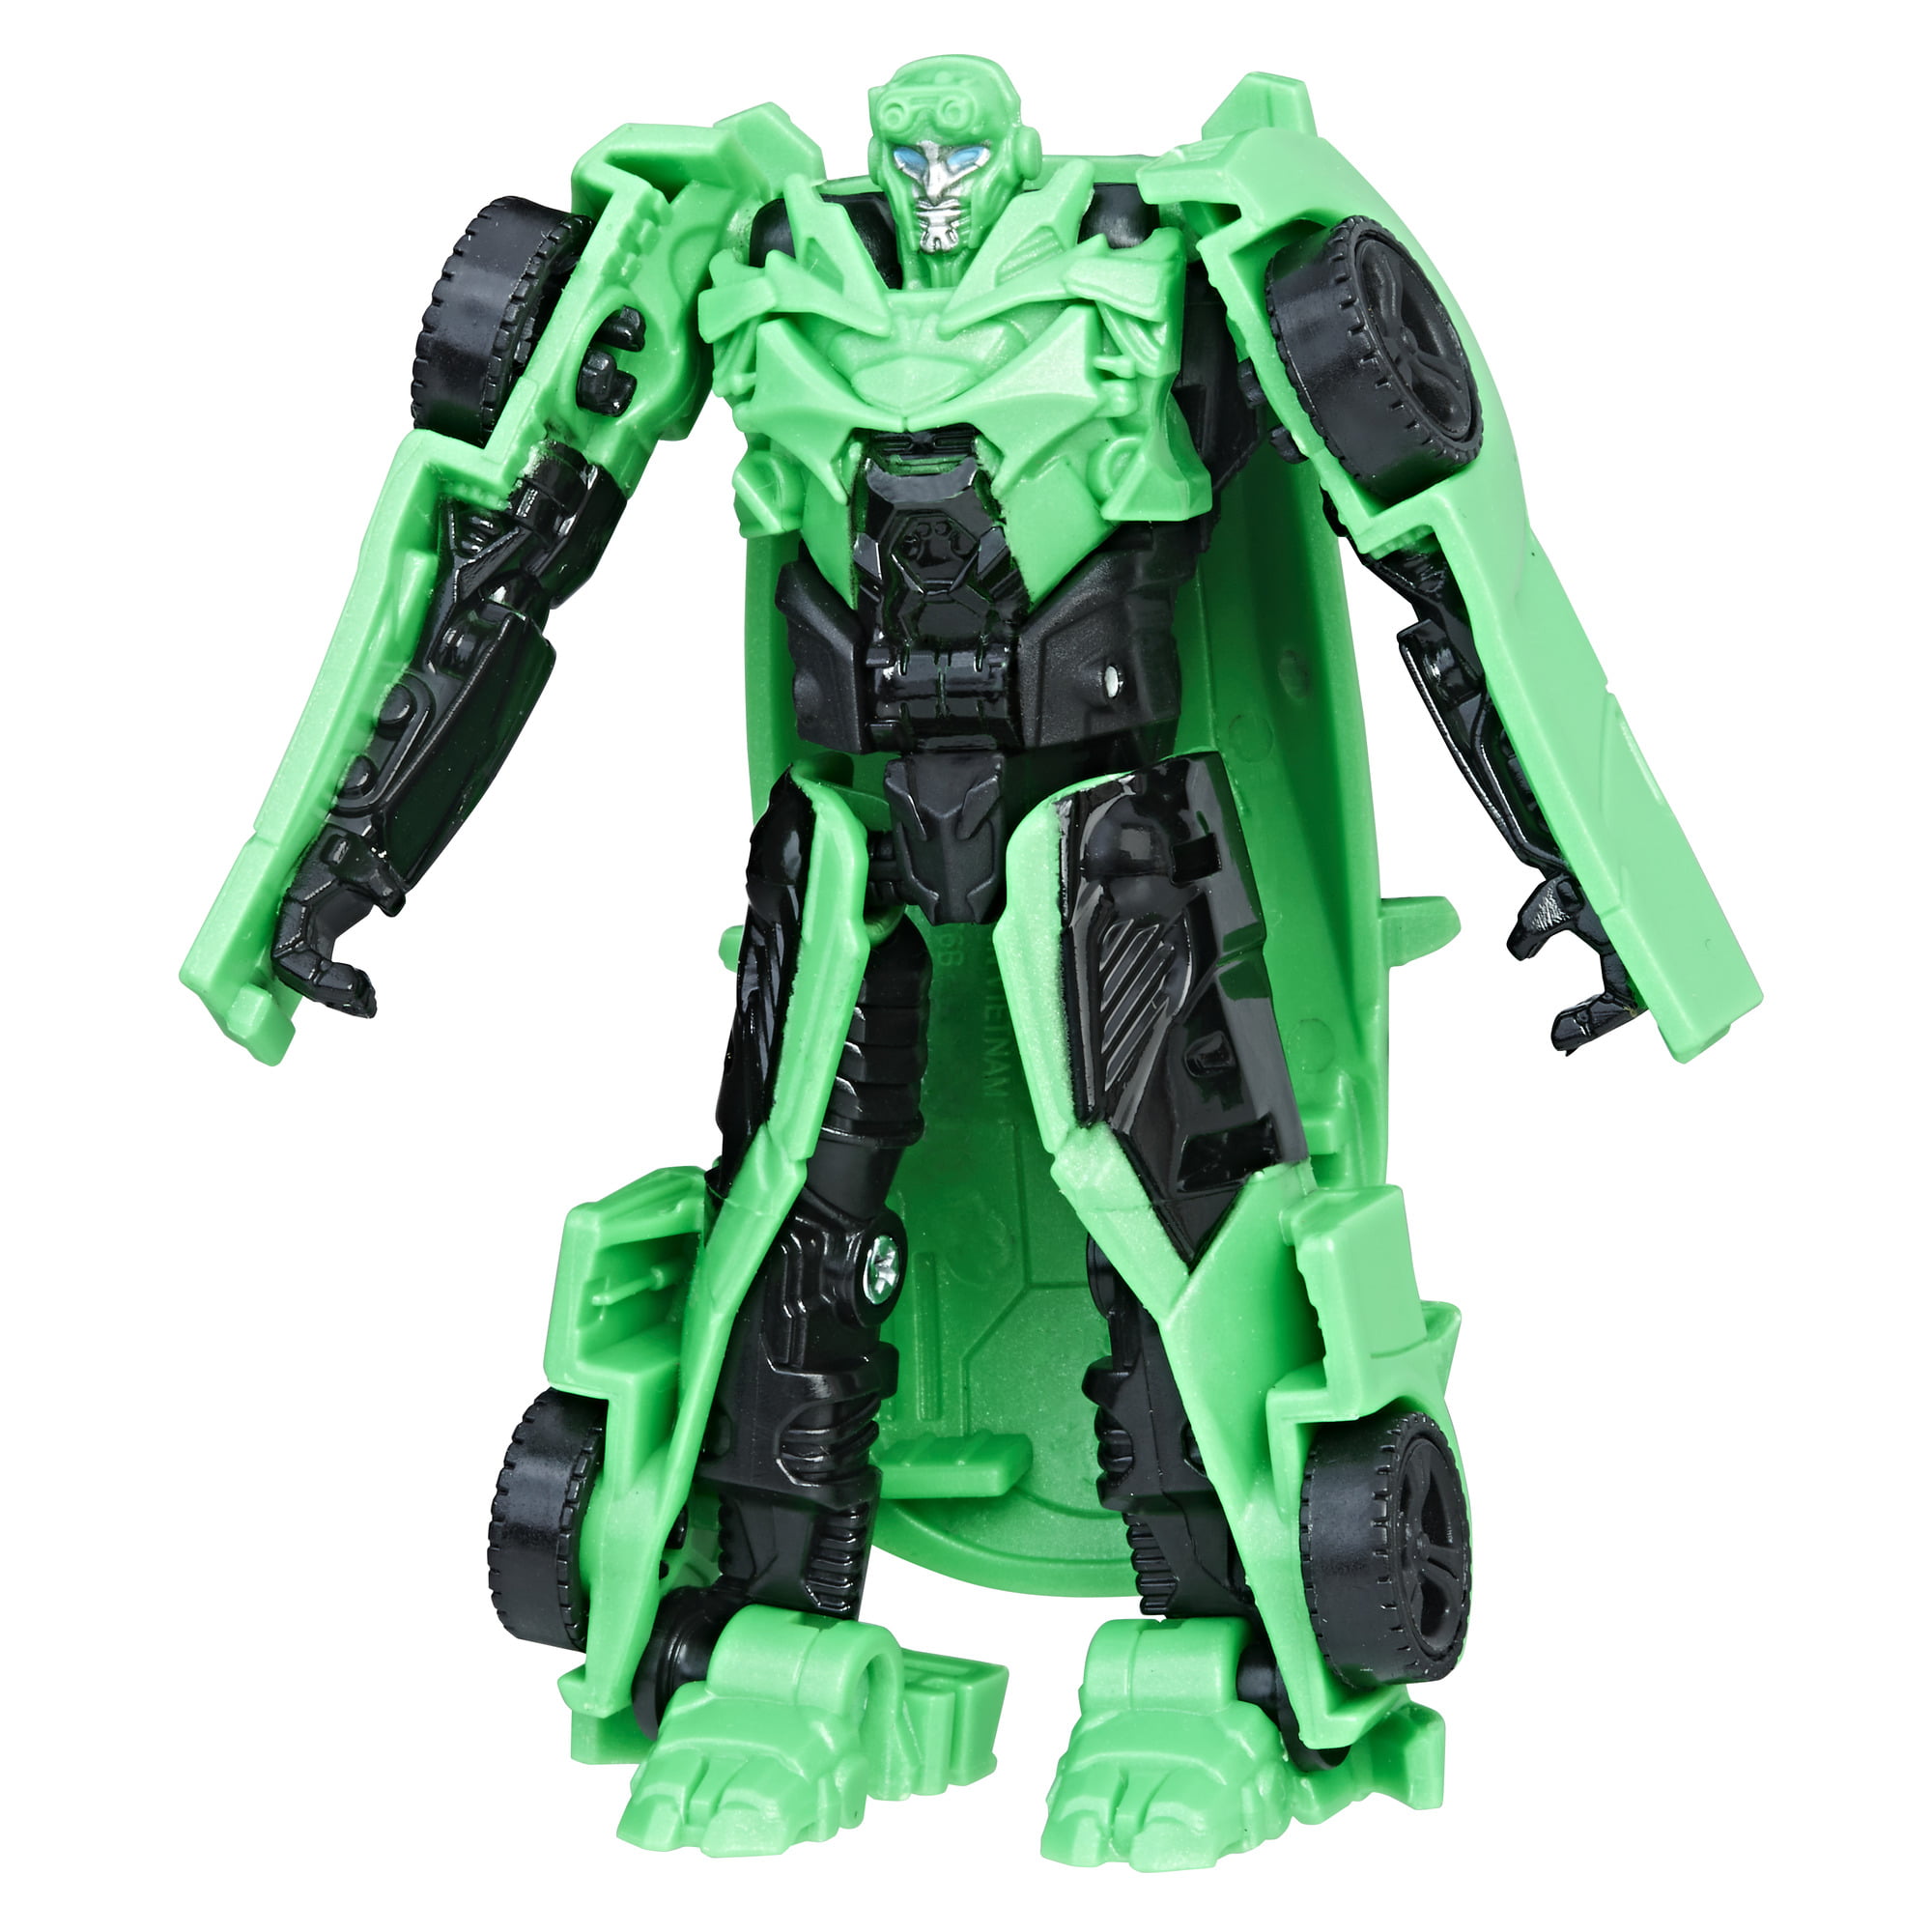 HASBRO TRANSFORMERS MV5 THE LAST KNIGHT DELUXE CROSSHAIRS ACTION FIGURE W3 